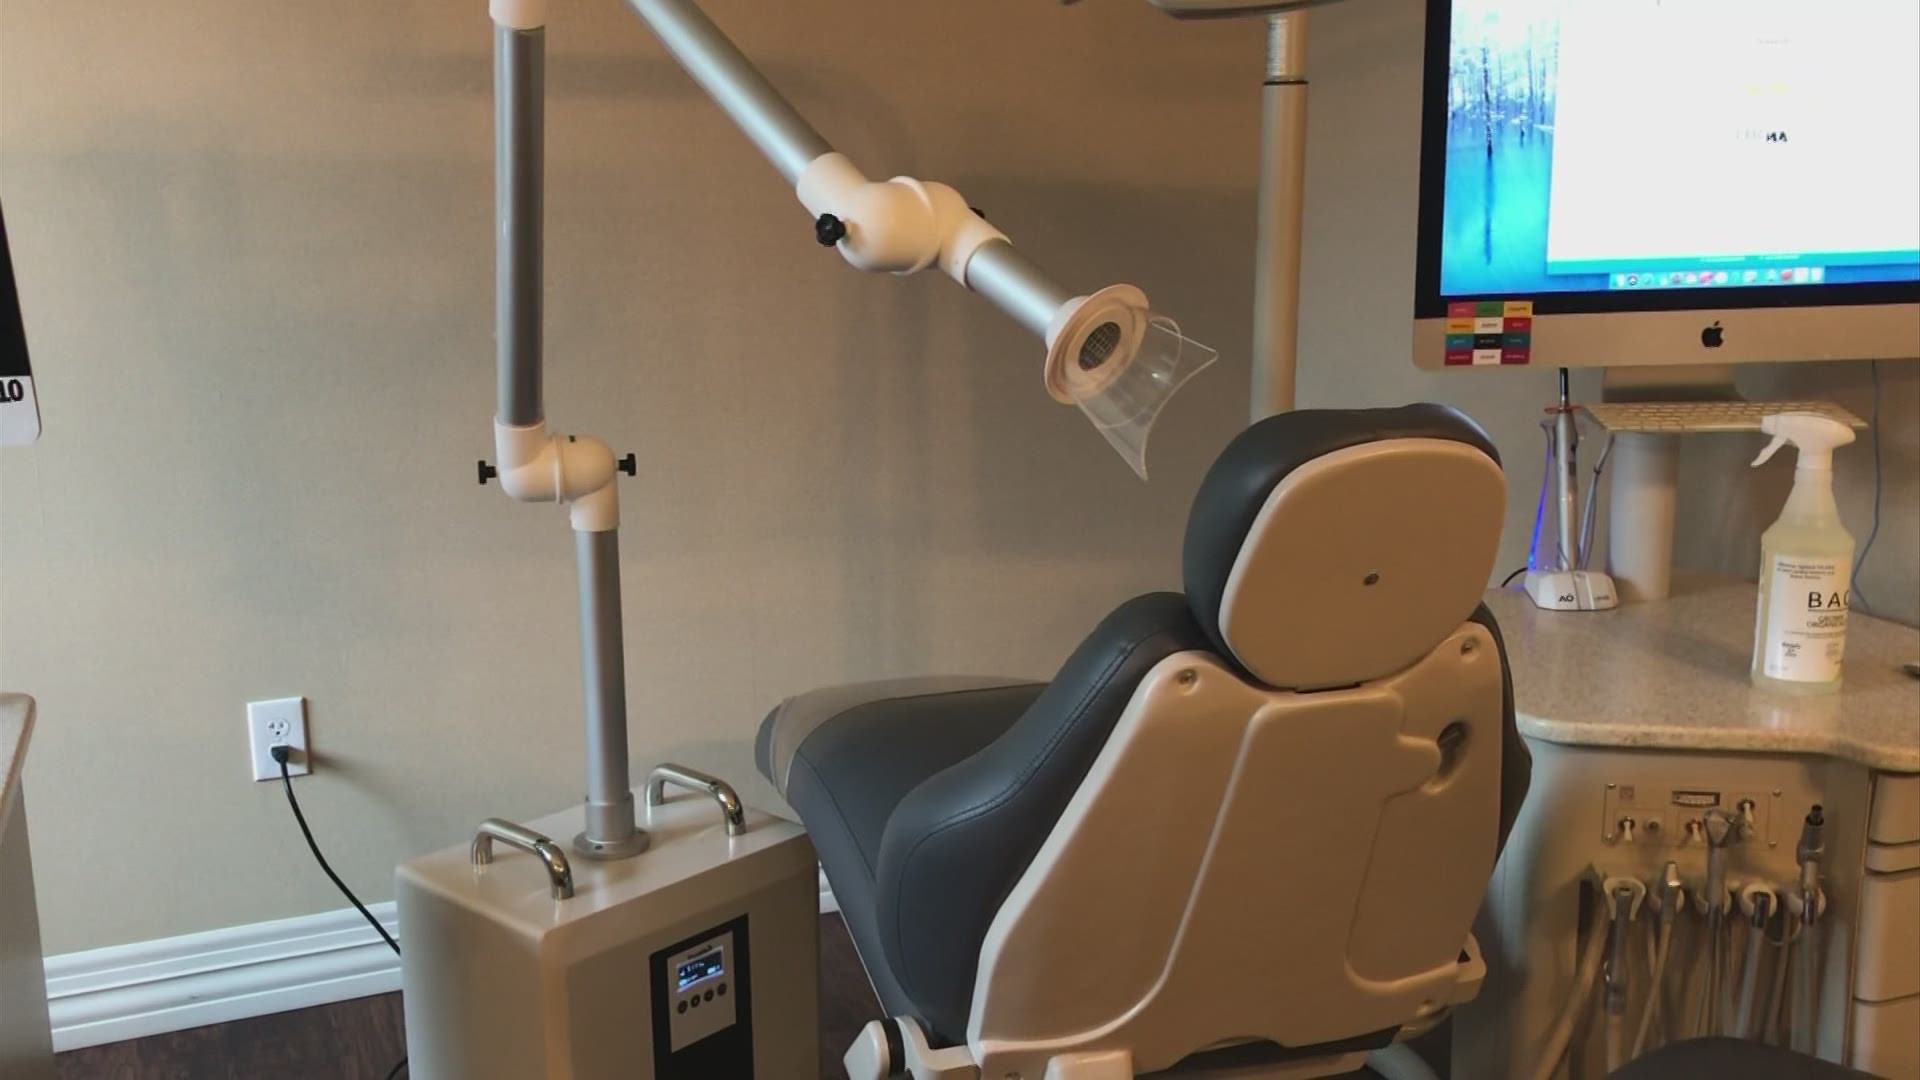 A Gahanna orthodontist is setting the bar high when it comes to dental care in the new normal.